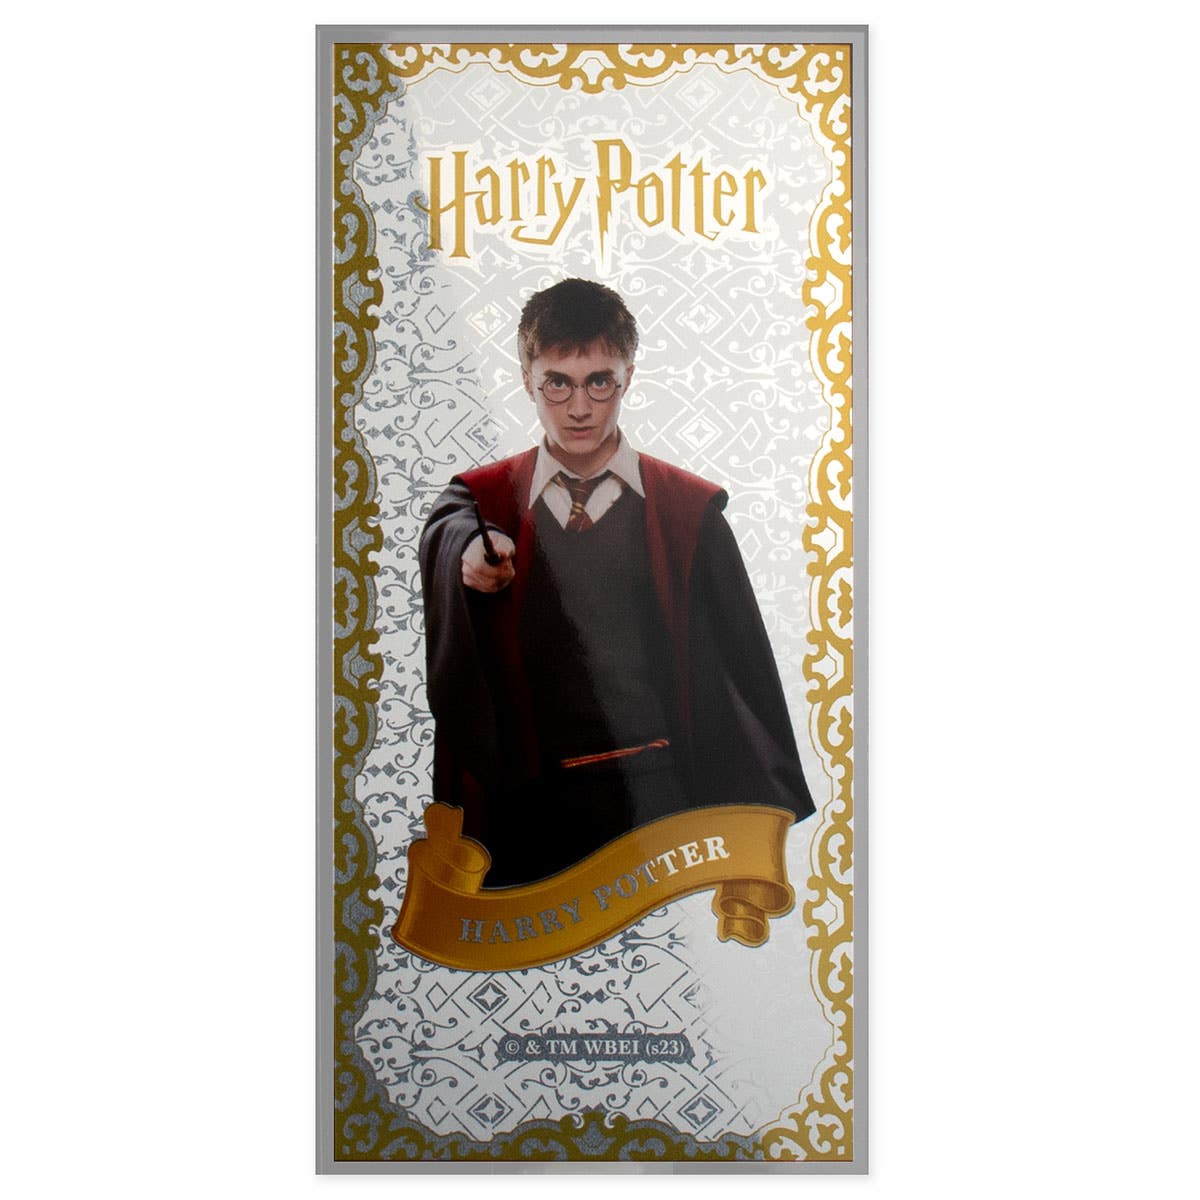 Harry Potter $1 Bookmark Silver Prooflike Coin